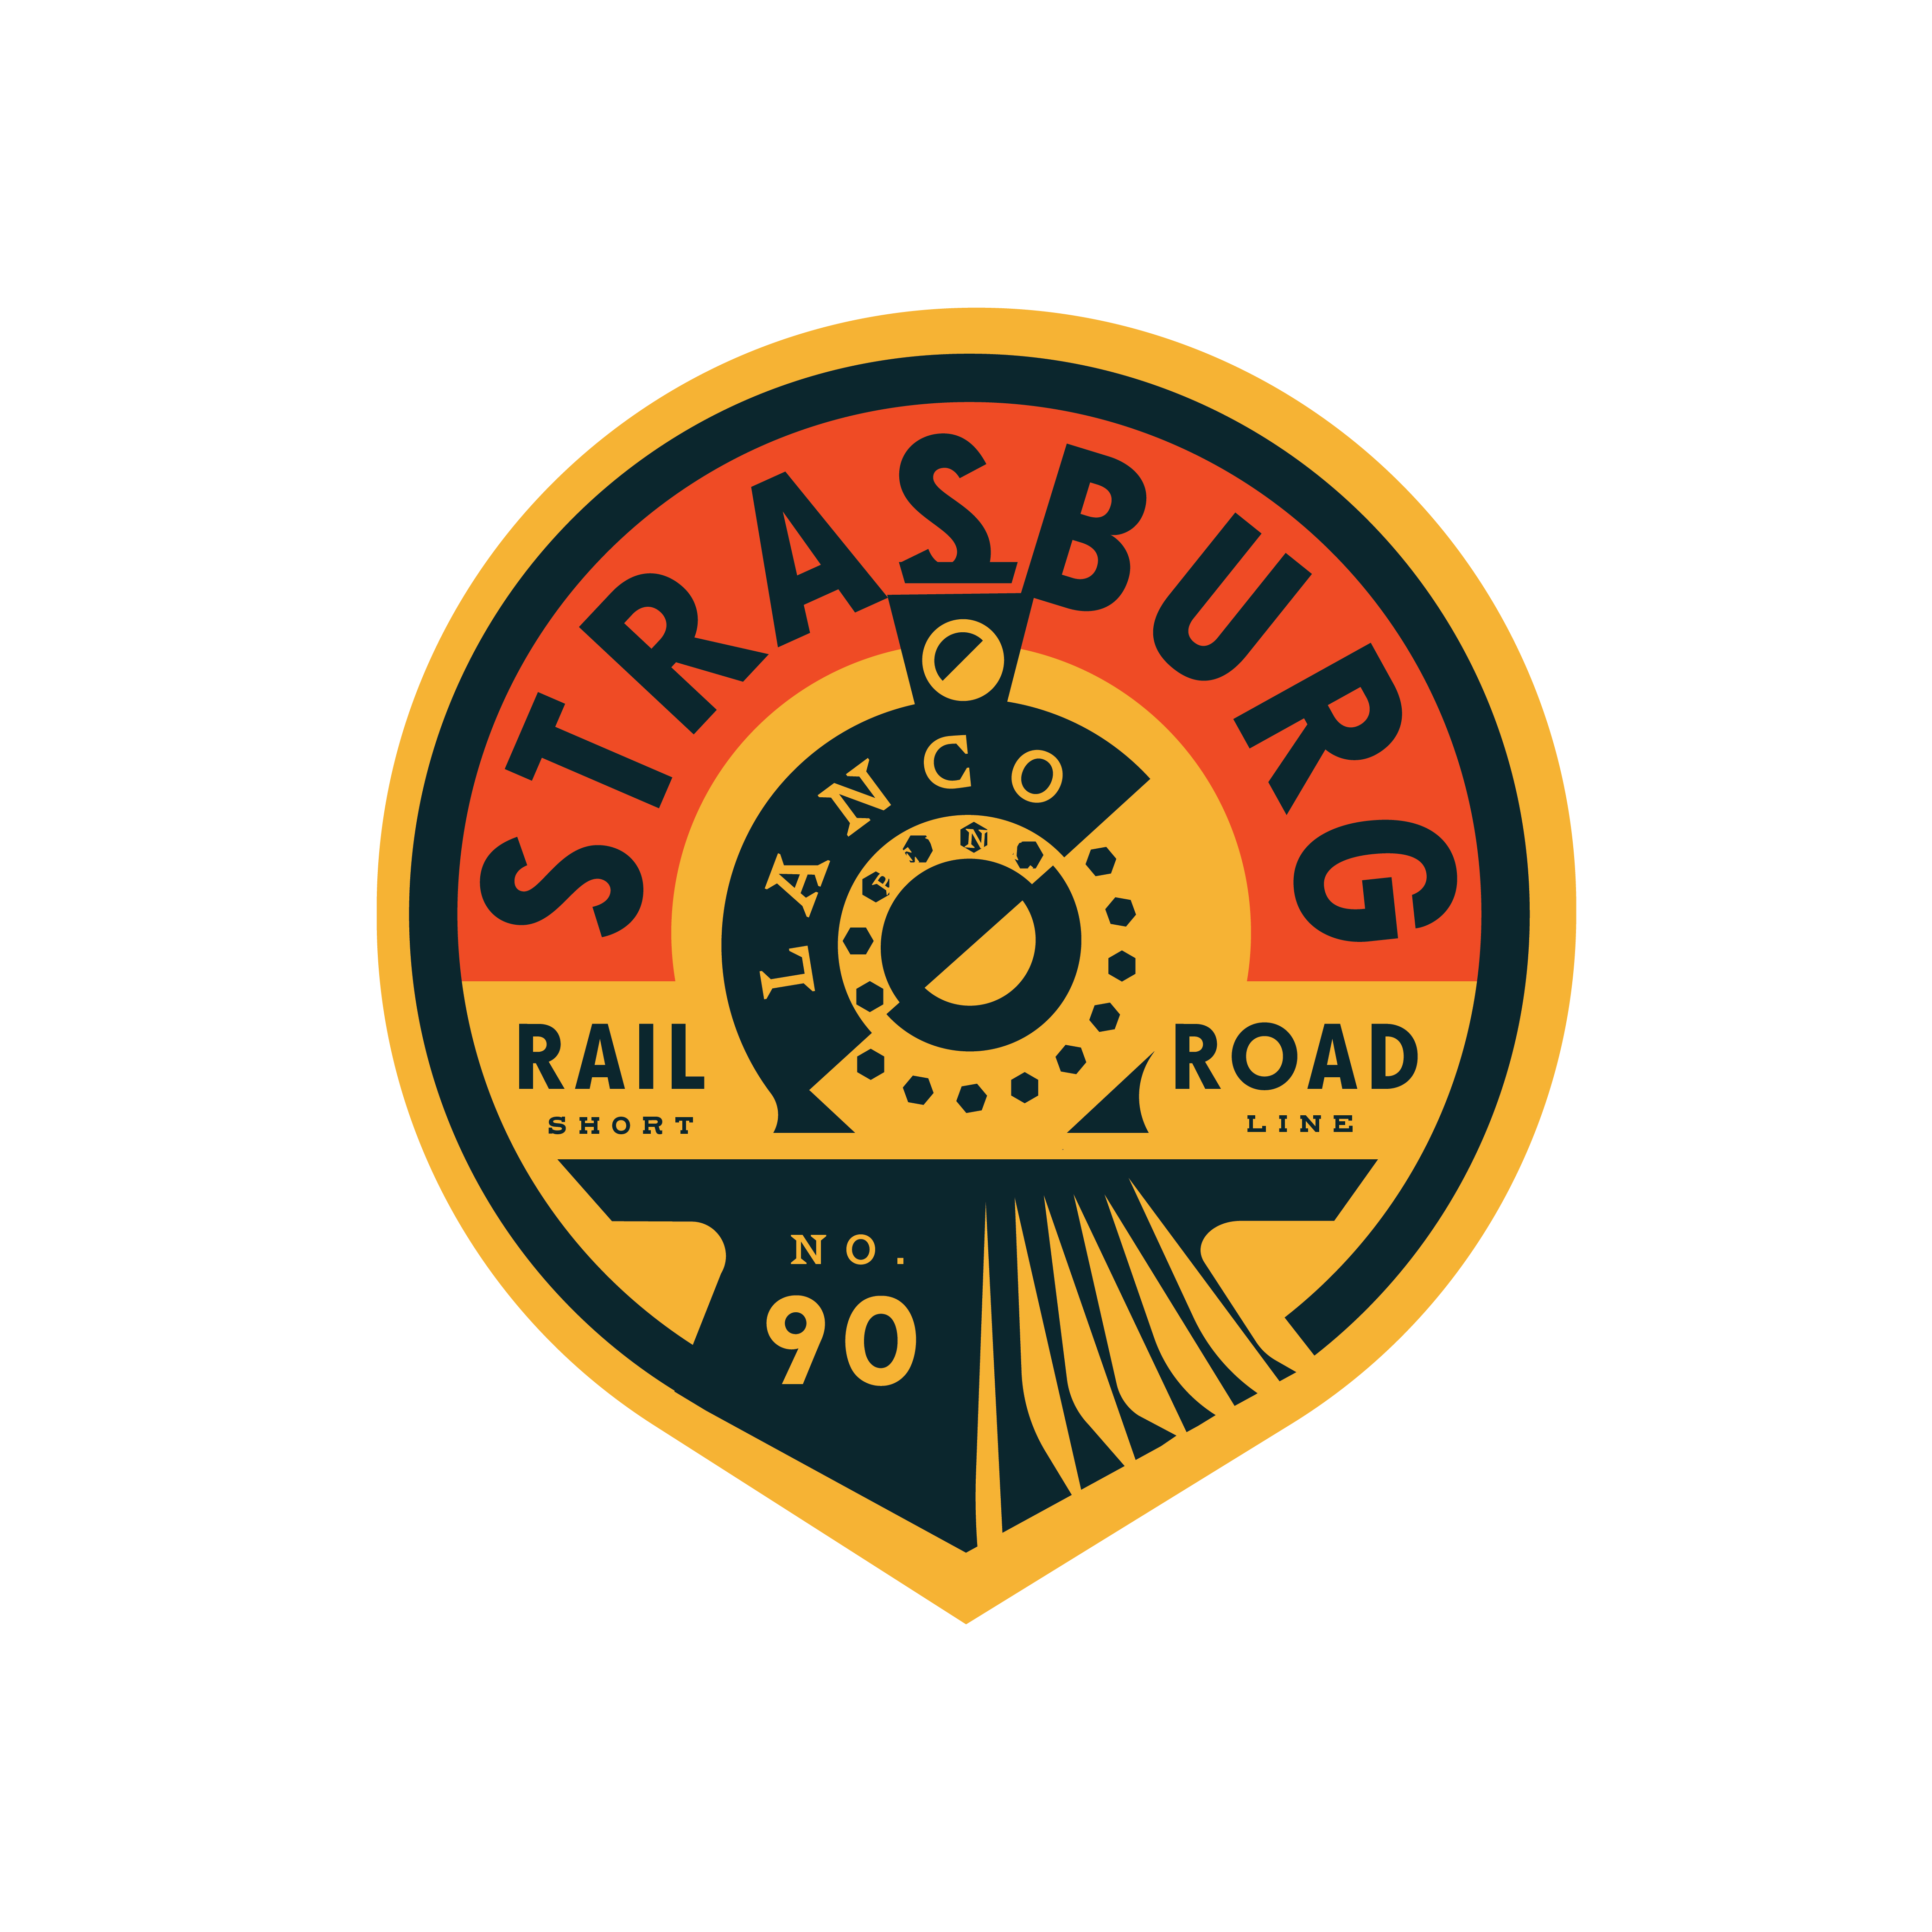 Strasburg Railroad3 logo design by logo designer Foxduck for your inspiration and for the worlds largest logo competition